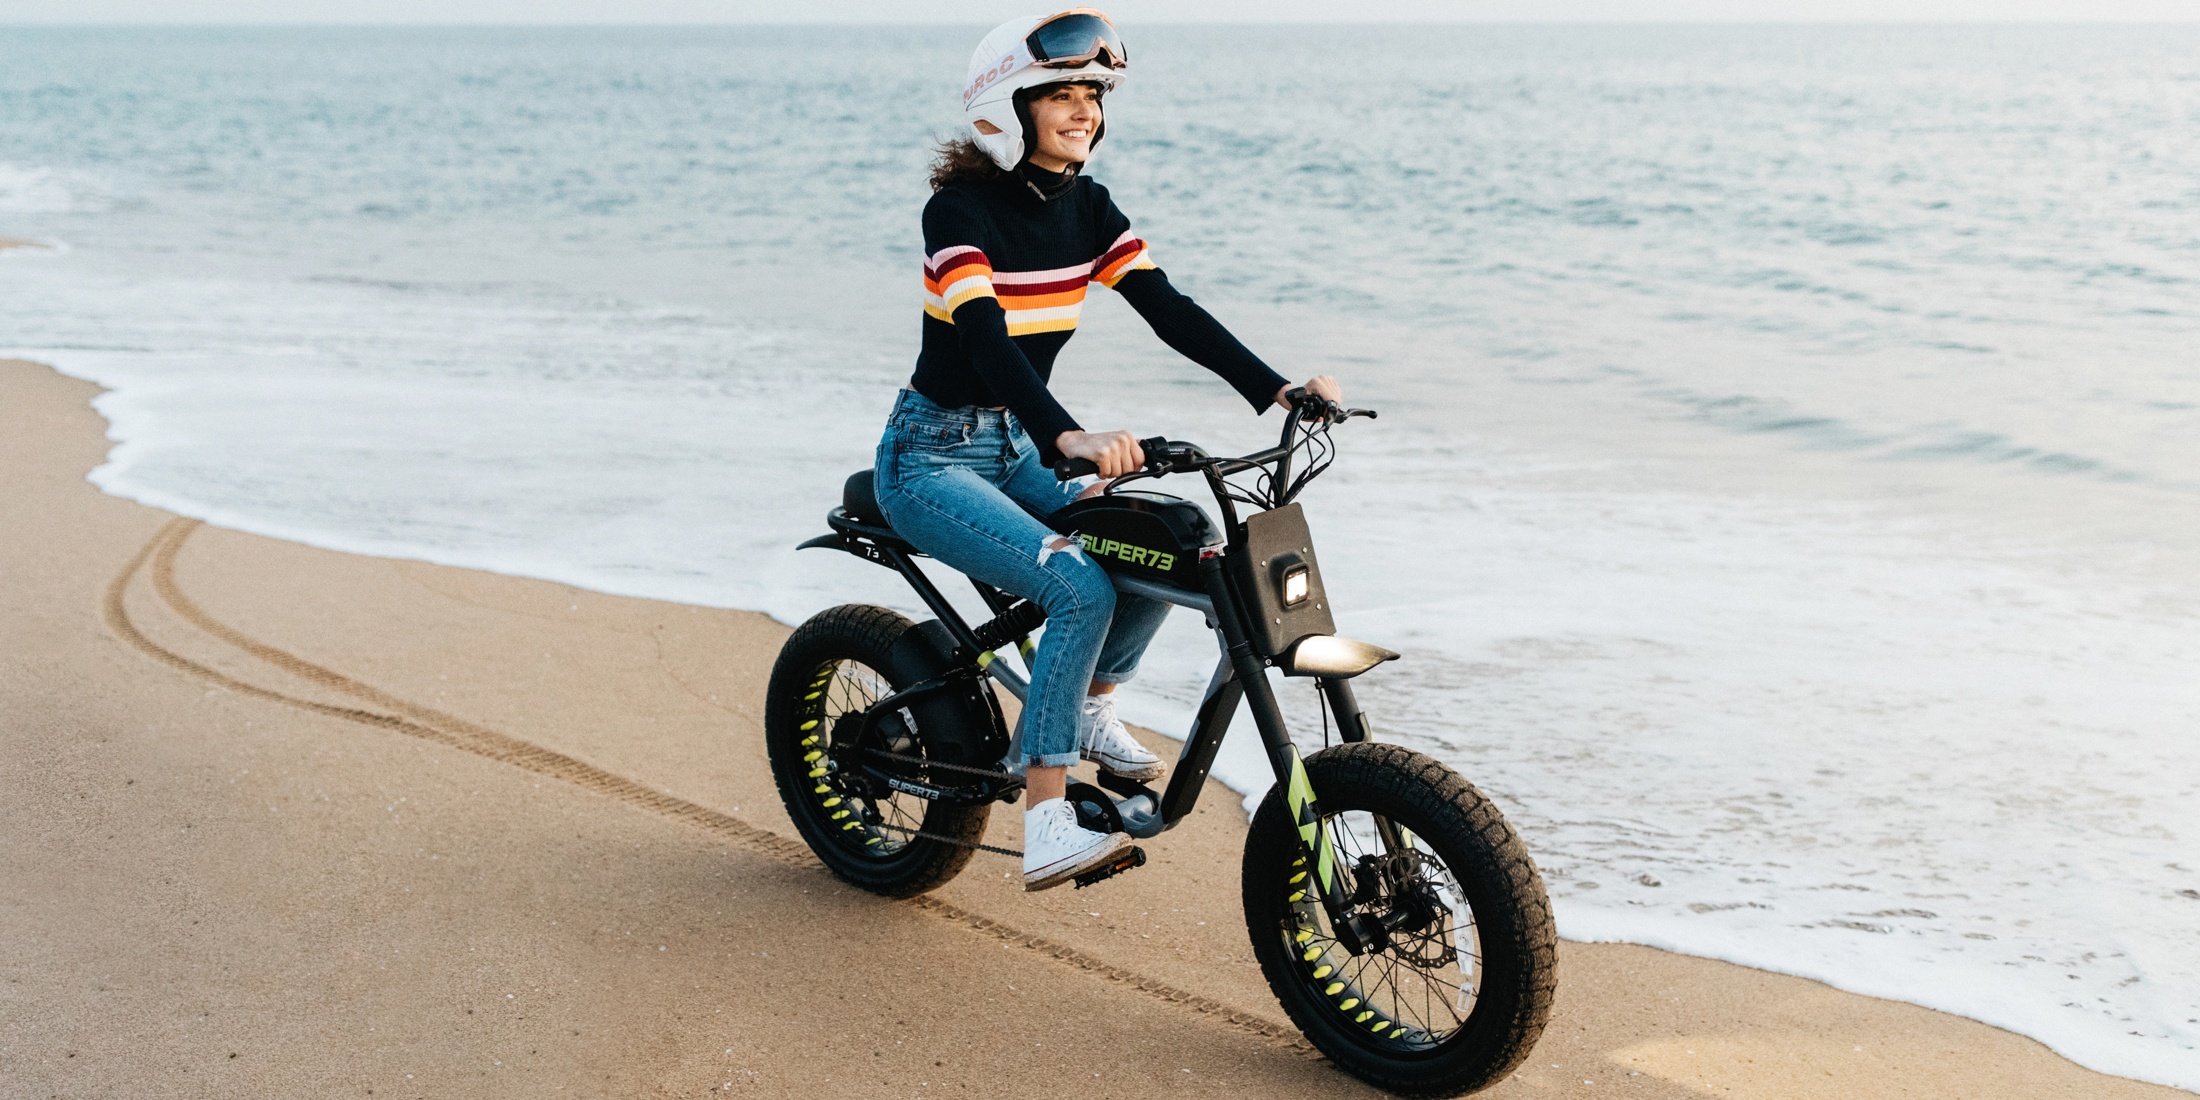 e-bikes unveiled with 2,000 W motor and 75 range